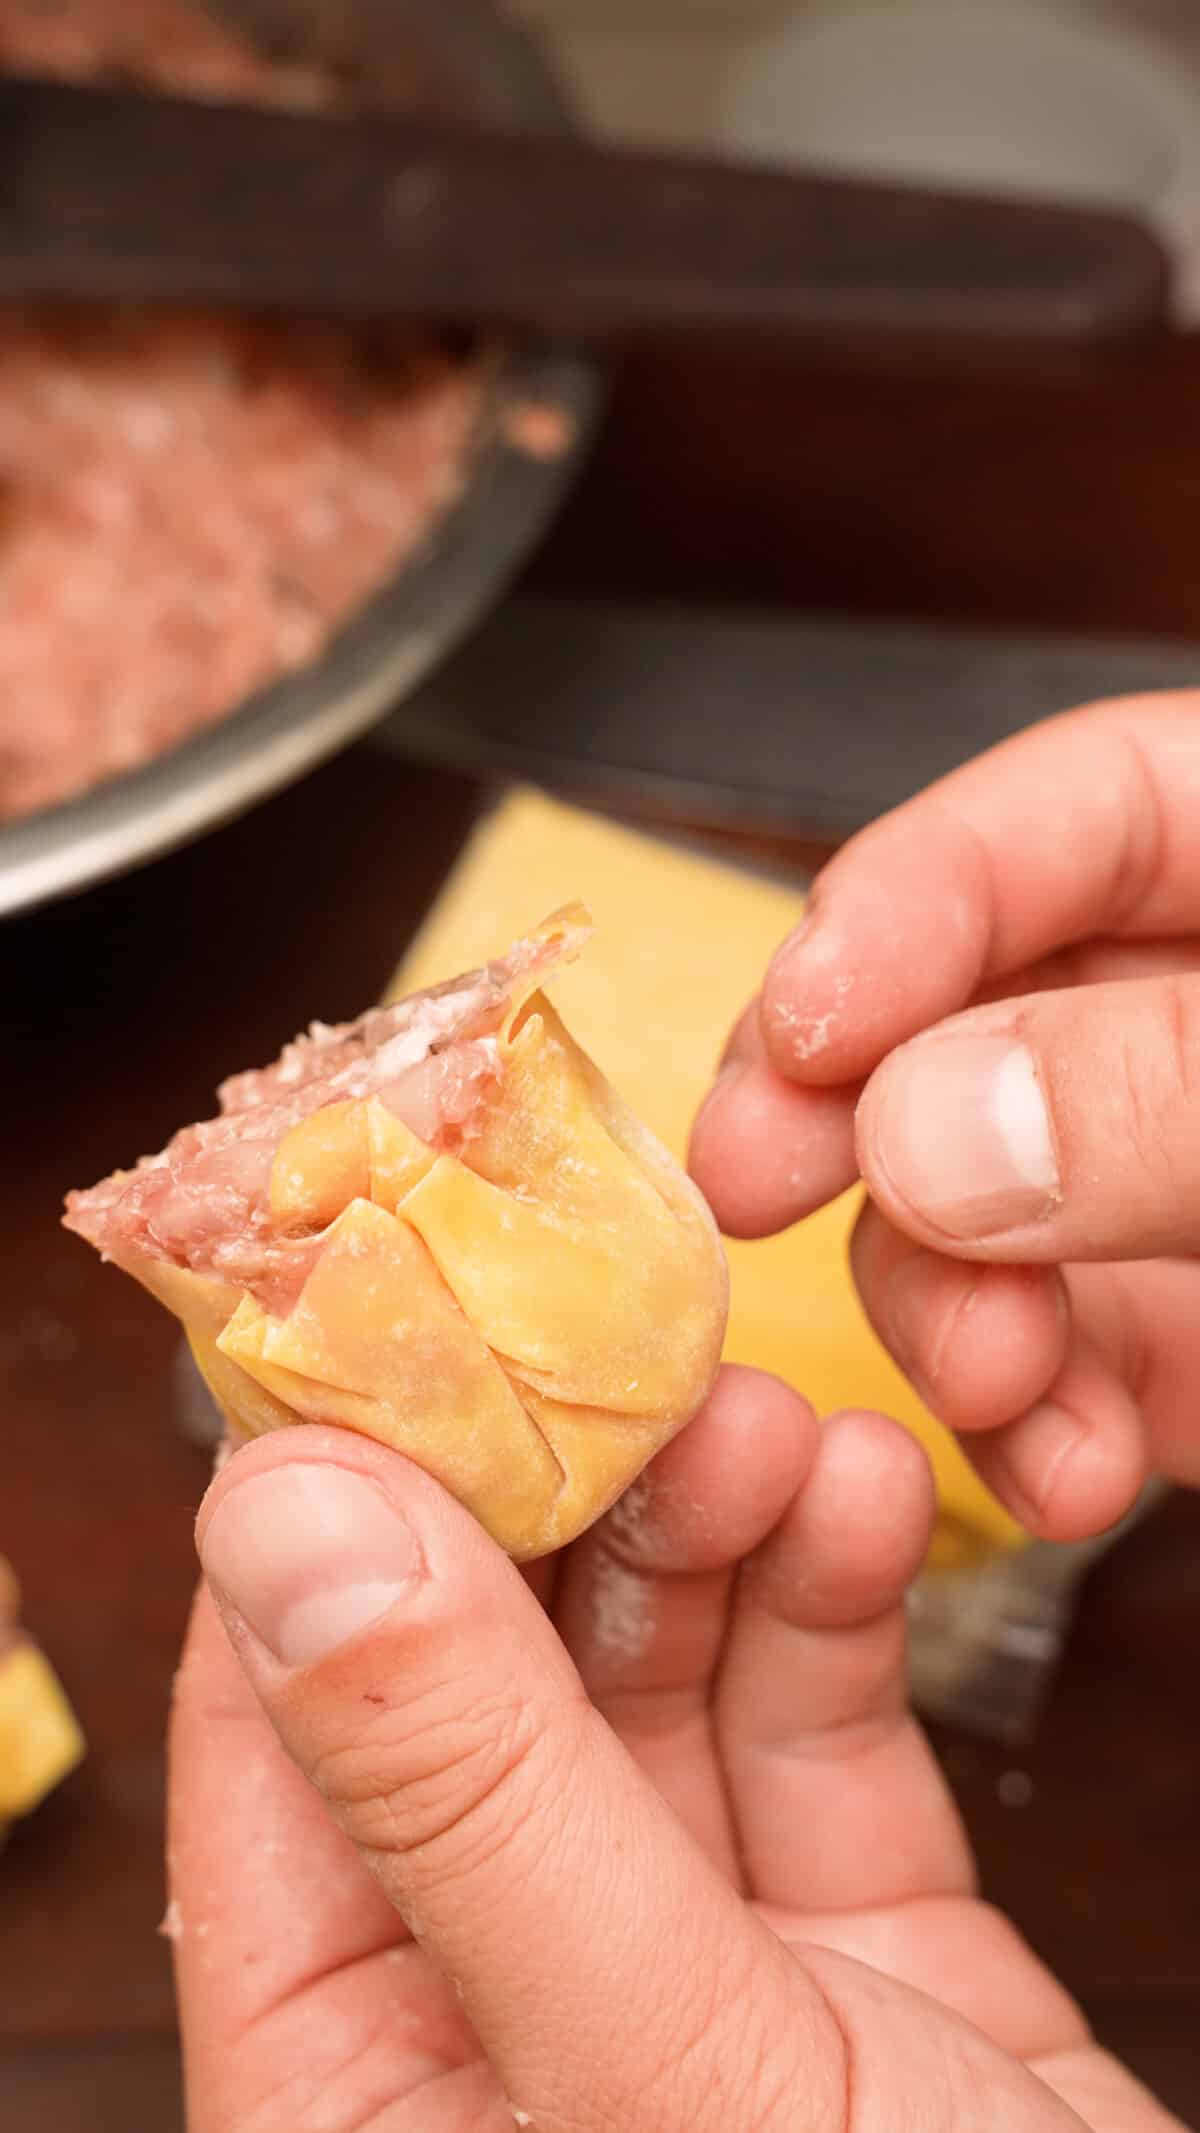 A finished Siu Mai dumpling being held in a hand.